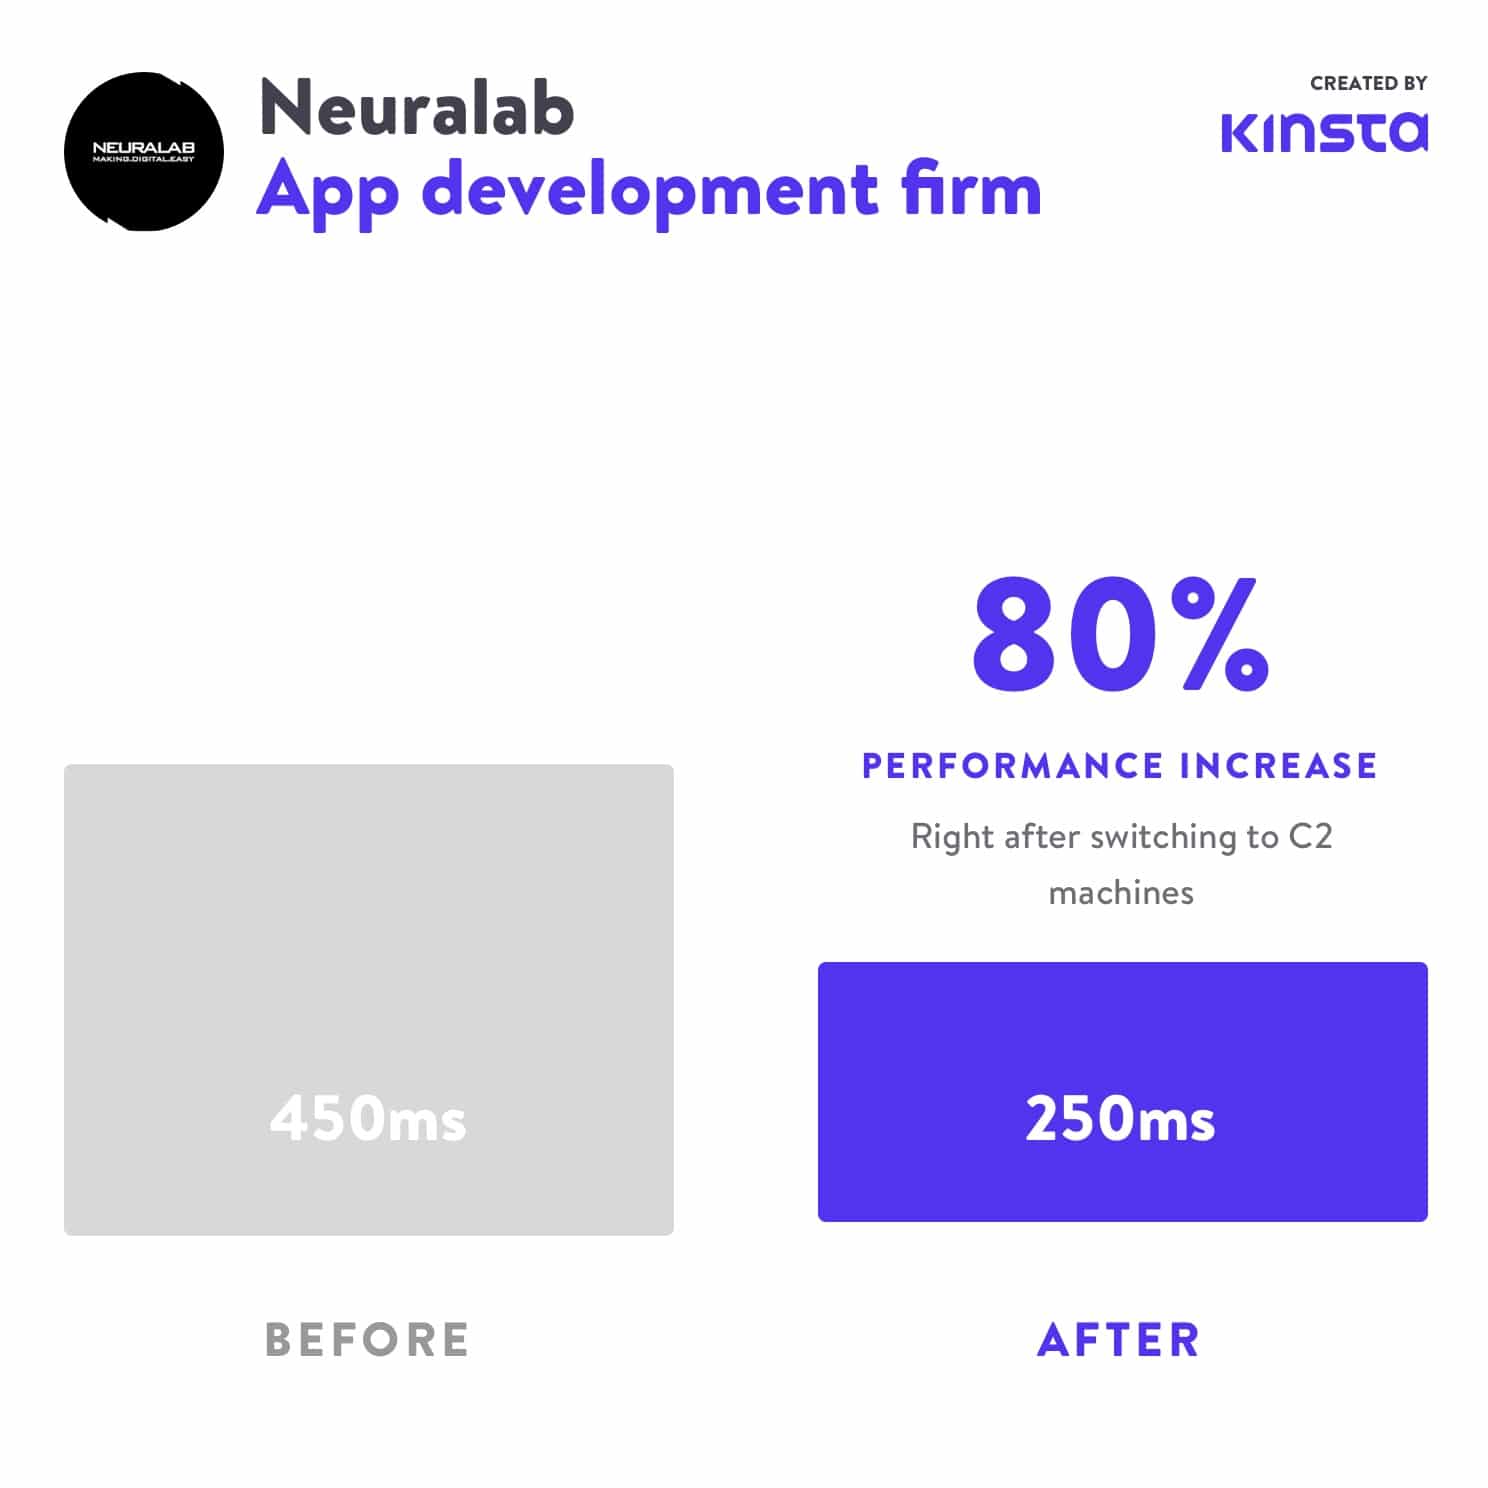 Neuralab saw a 80% performance increase after moving to C2.